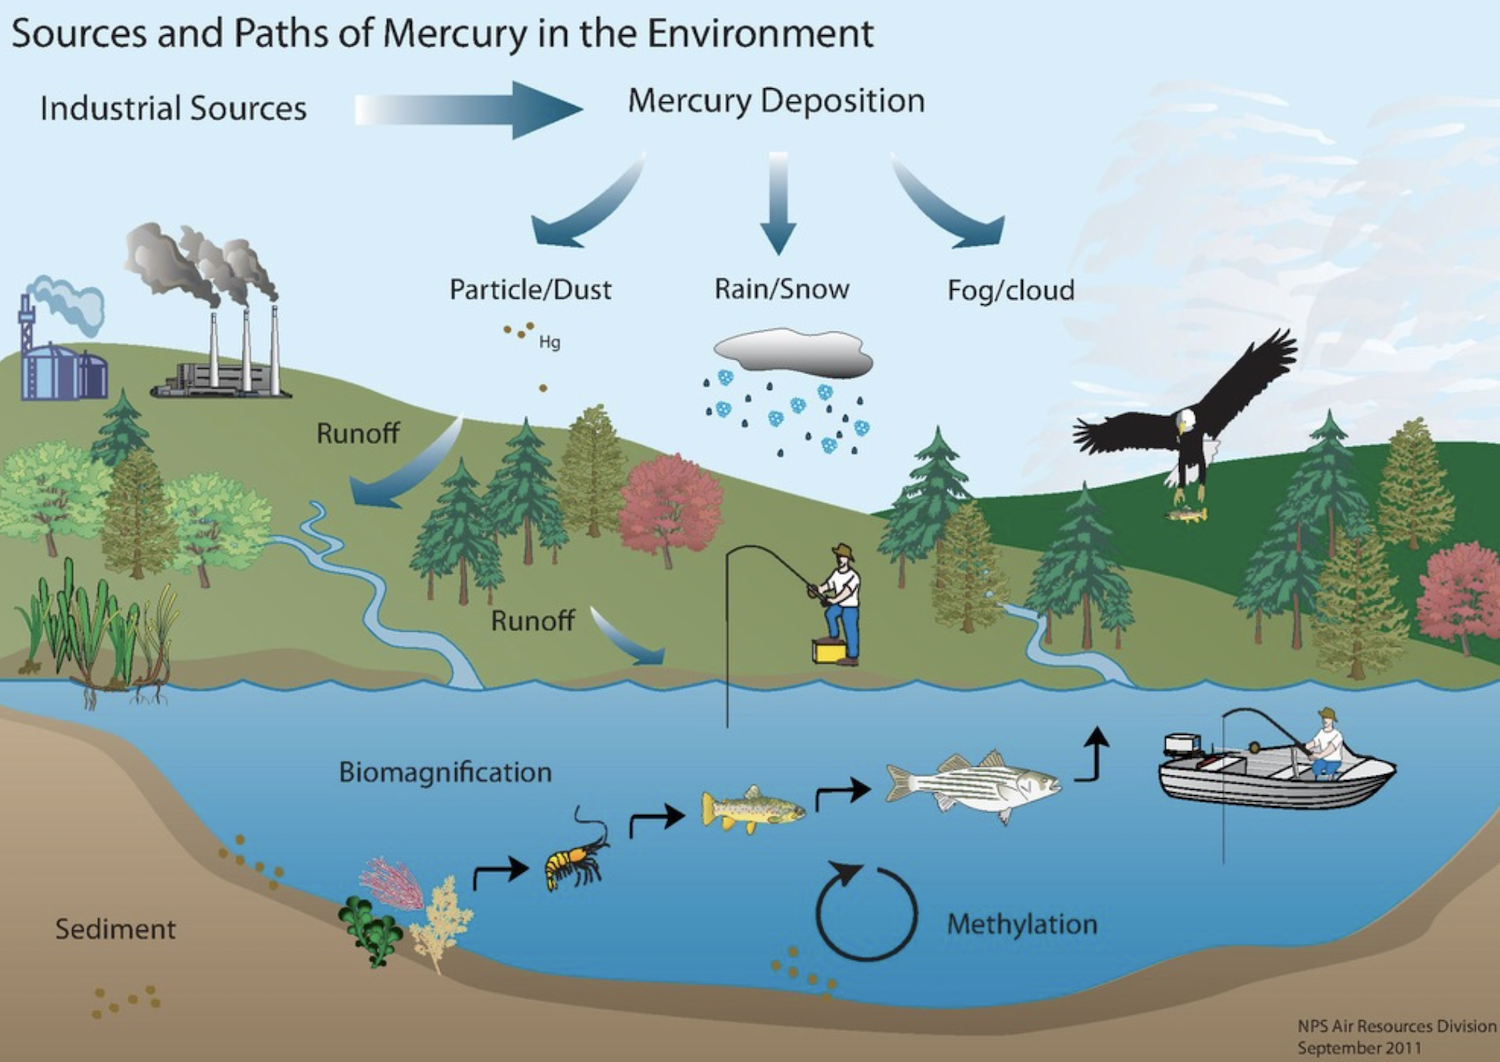 Sources and Paths of Mercury in the Environment, from National Park Service.